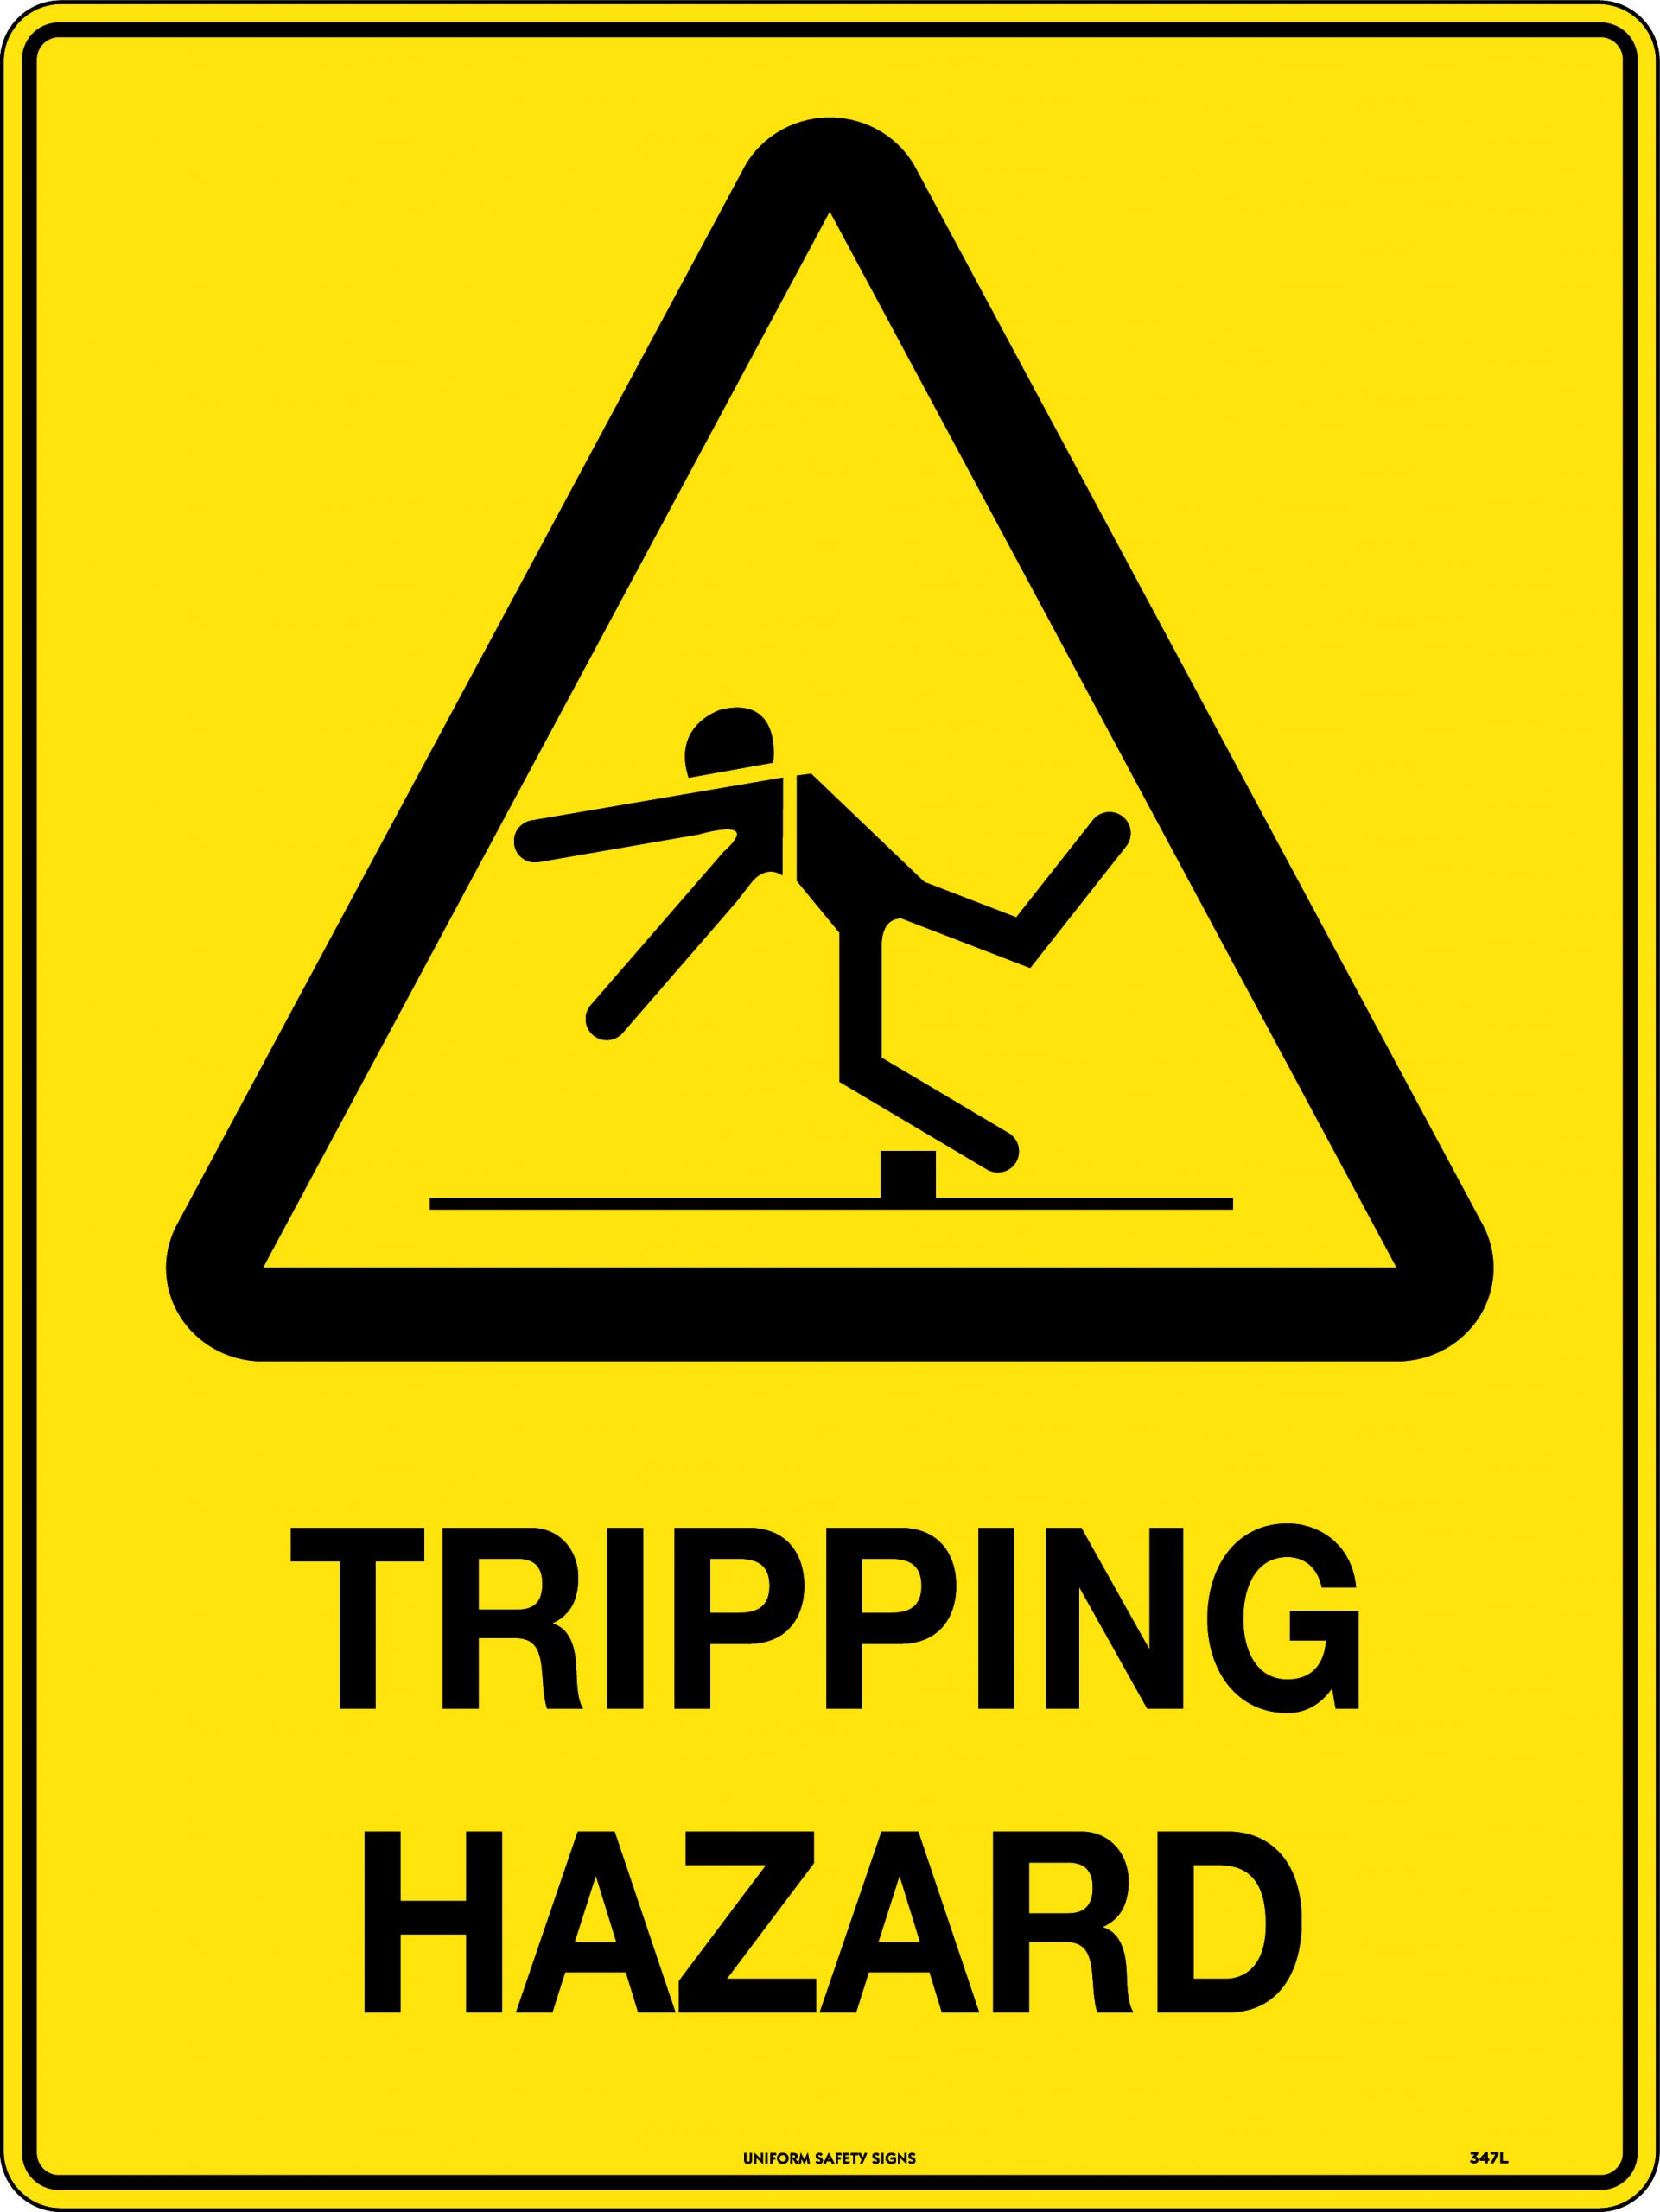 Safety Hazards Signs In The Workplace